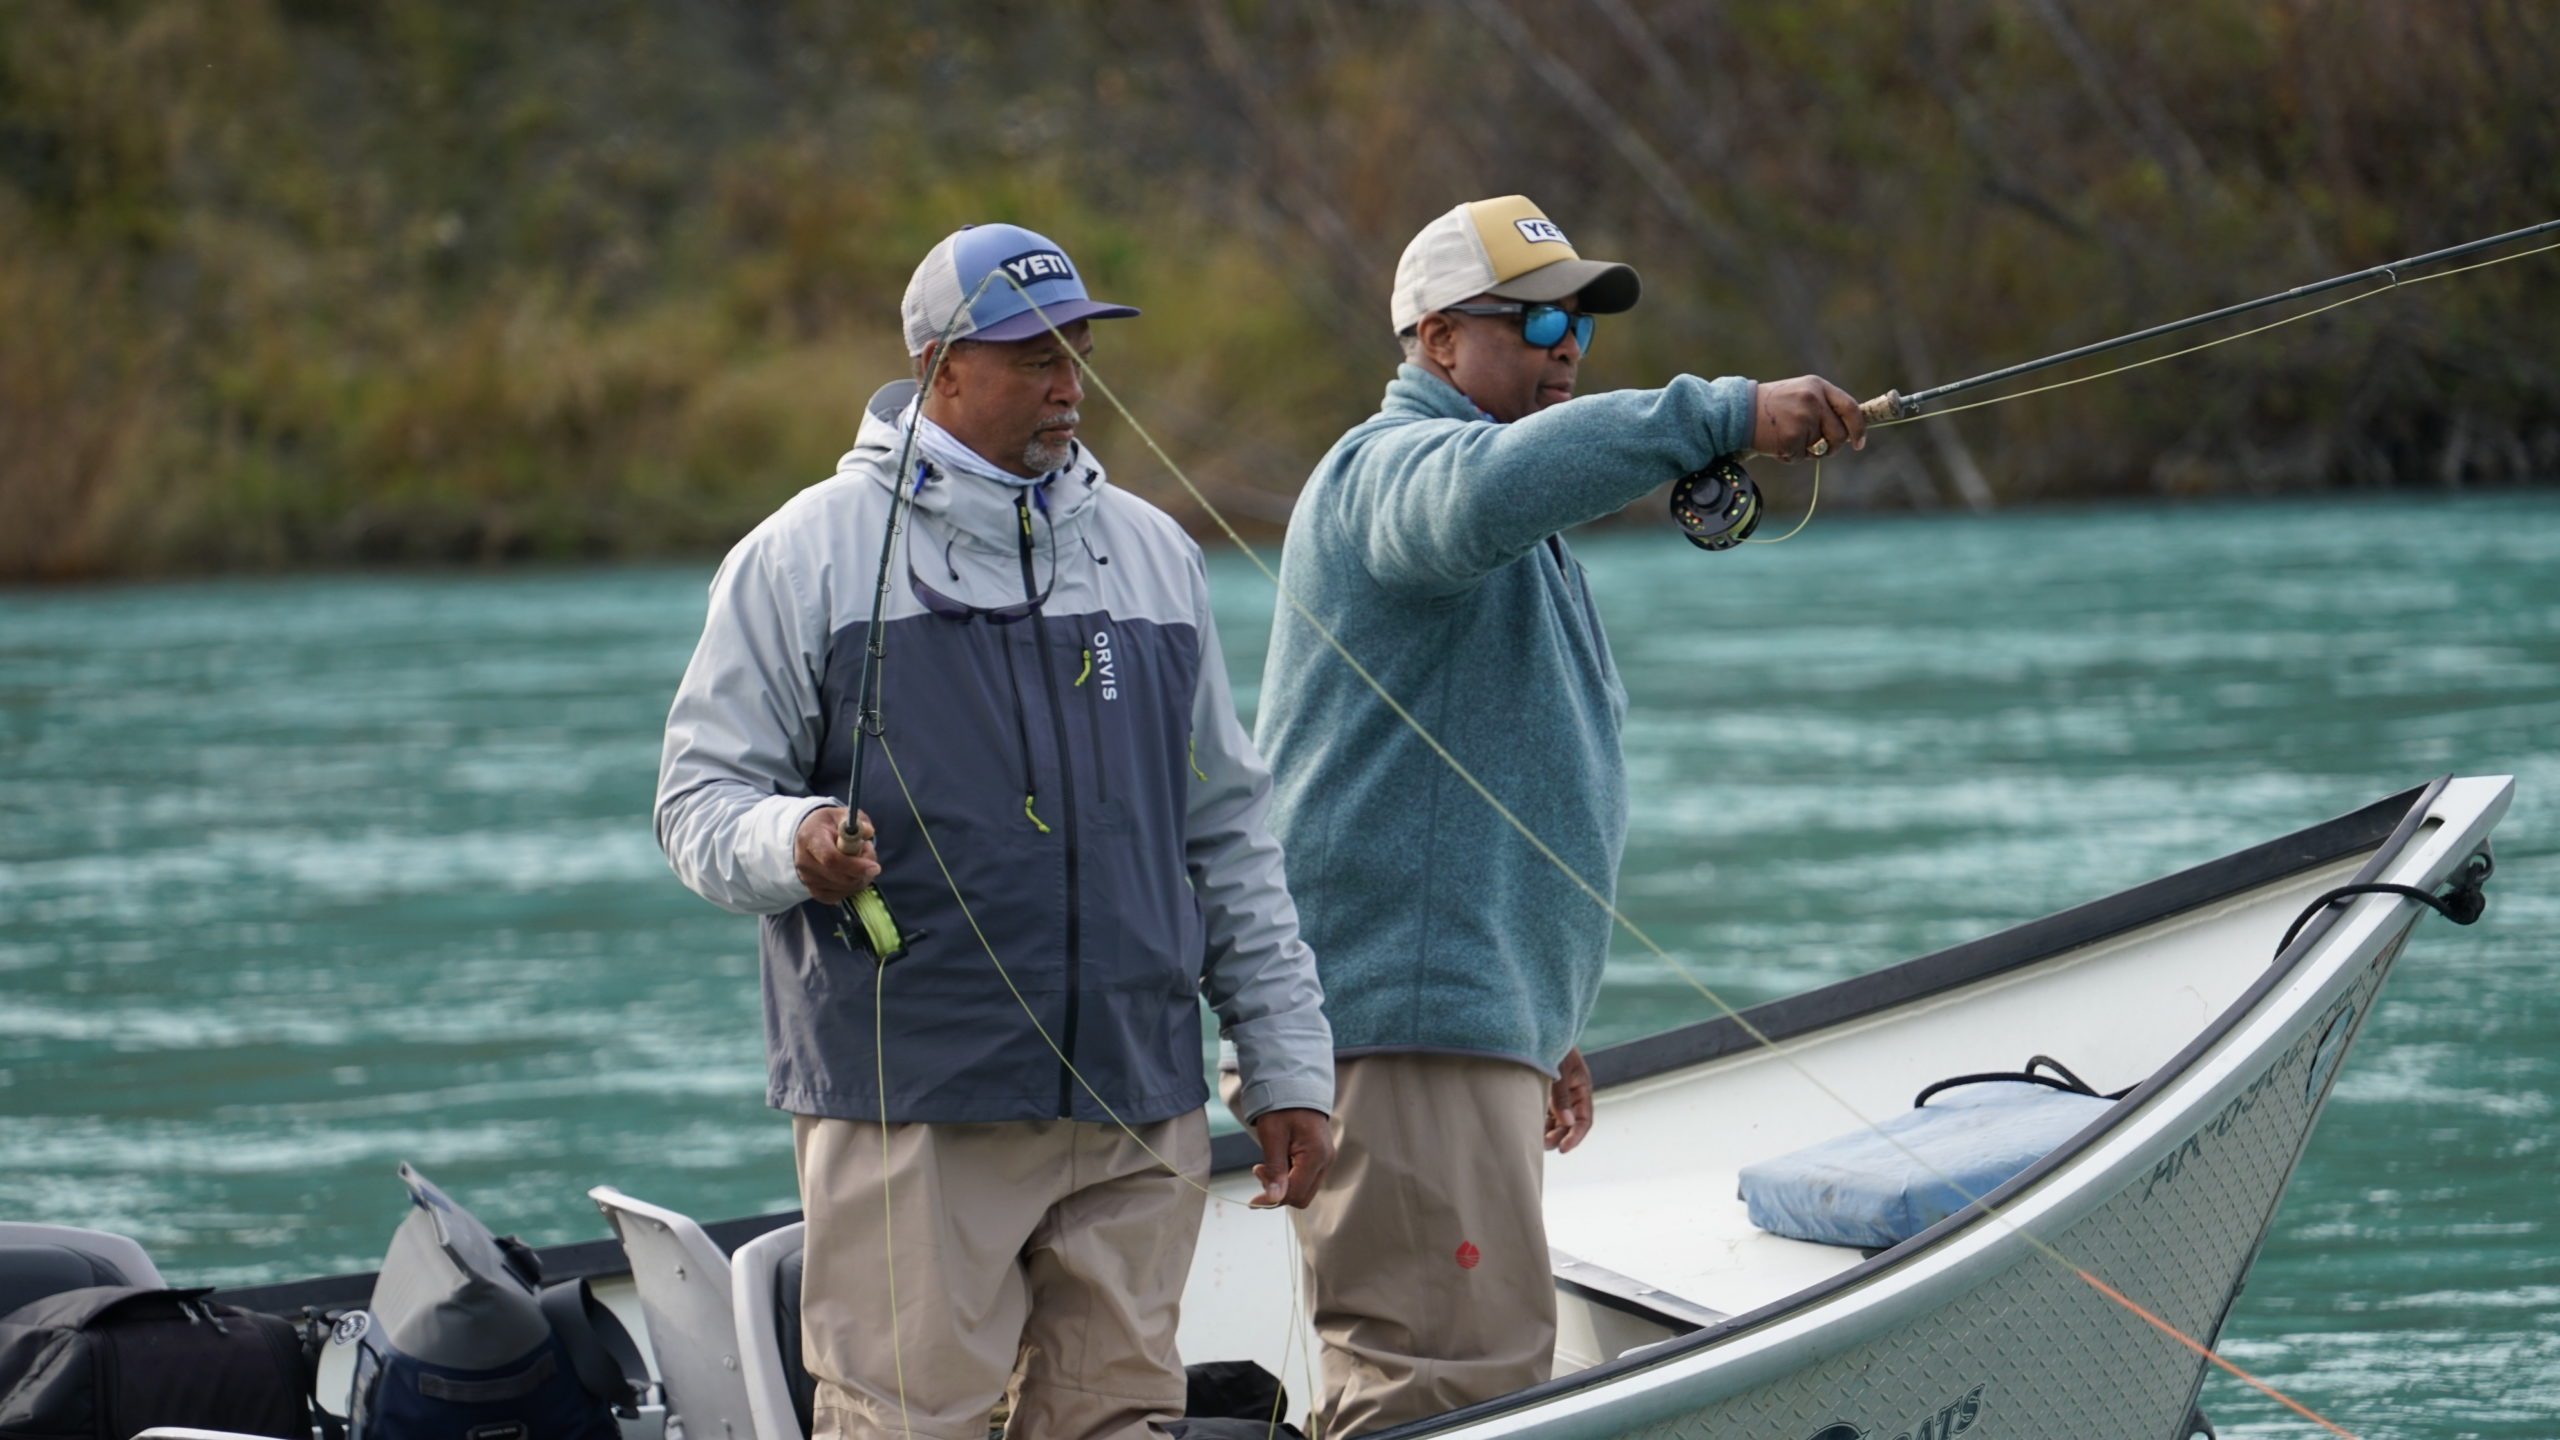 Check Out: Reel Fishing with Upstream TV Show